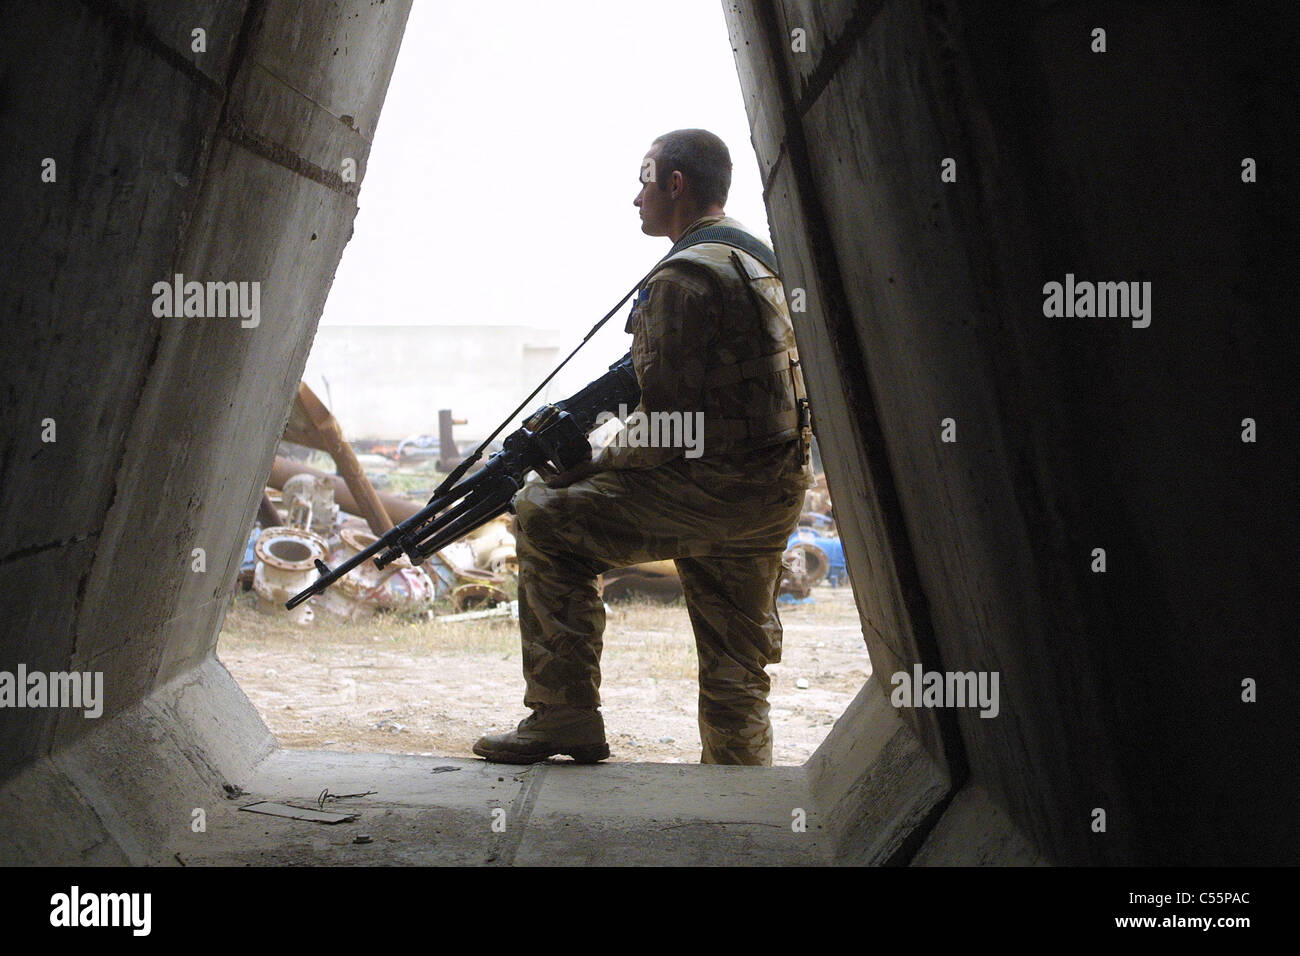 A Royal Fusiler/Desert Rat stands guarding a facility during the invasion of Iraq in 2003. Stock Photo